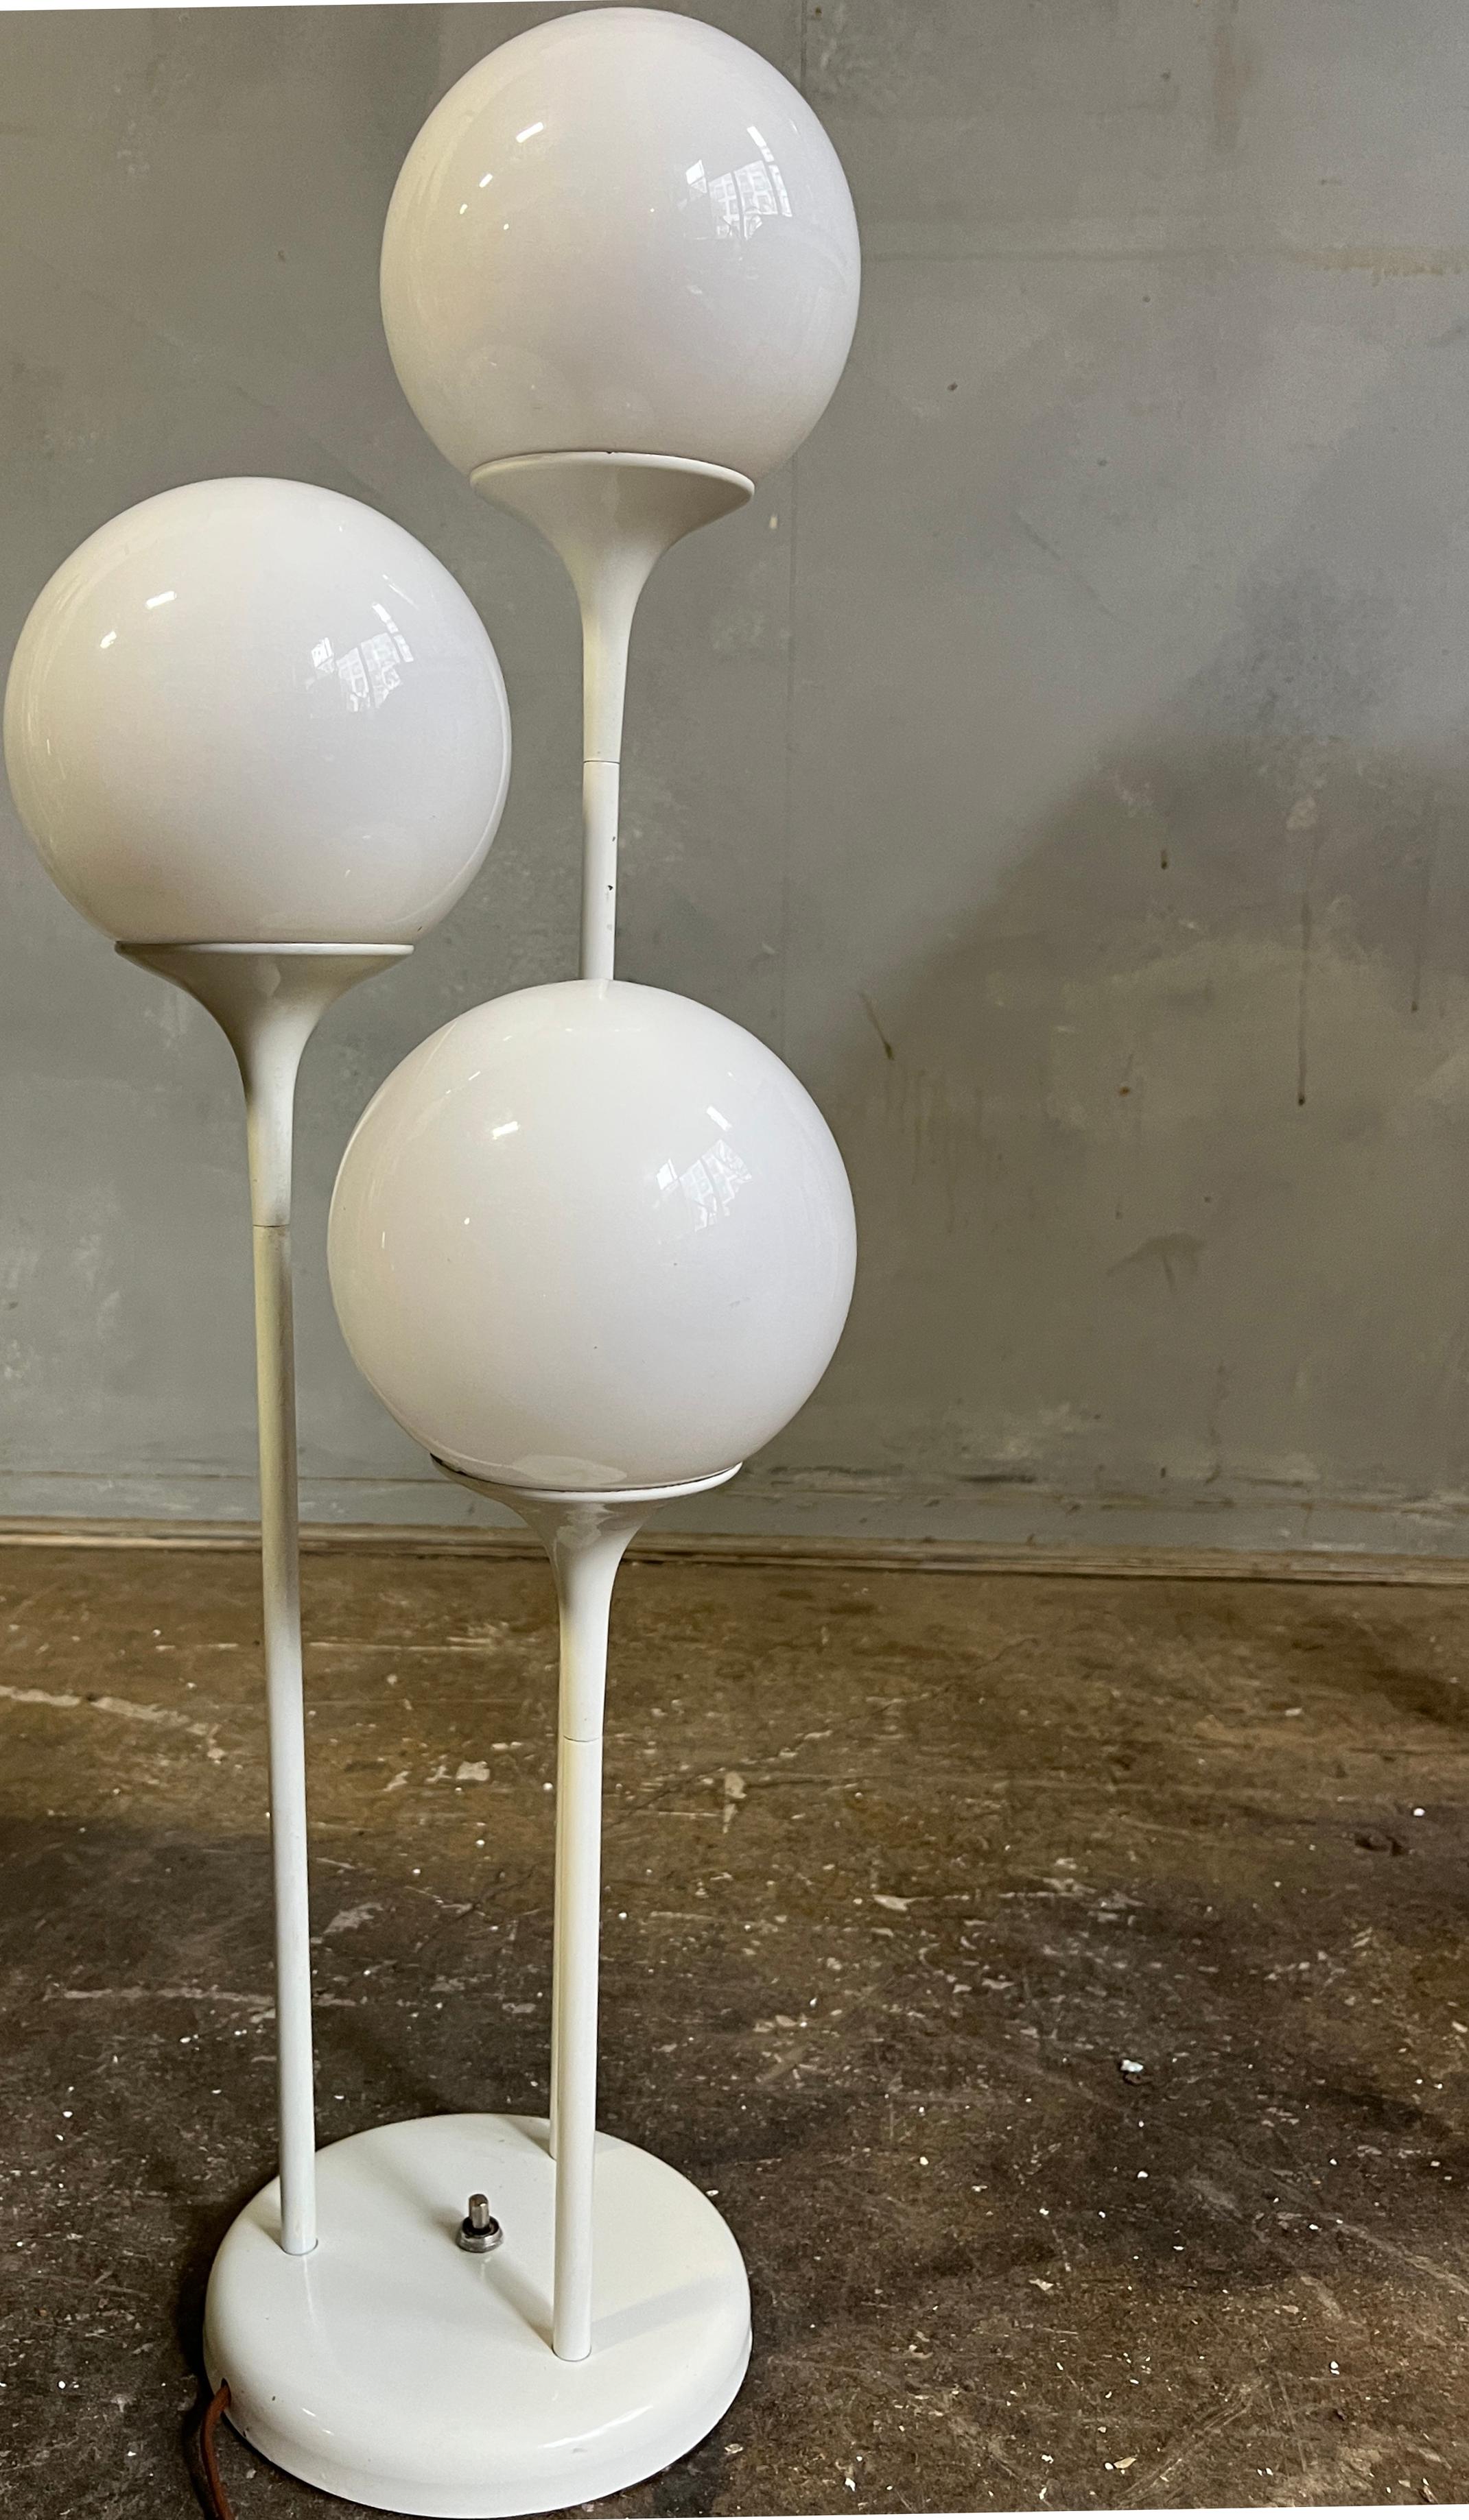 An uncommon white enameled floor lamp with three white glass globes on metal stems that mimic popular architectural themes of the period, namely Eero Saarinens' tulip style hourglass forms.   Lamp is heavy and sturdy due to being solid metal.